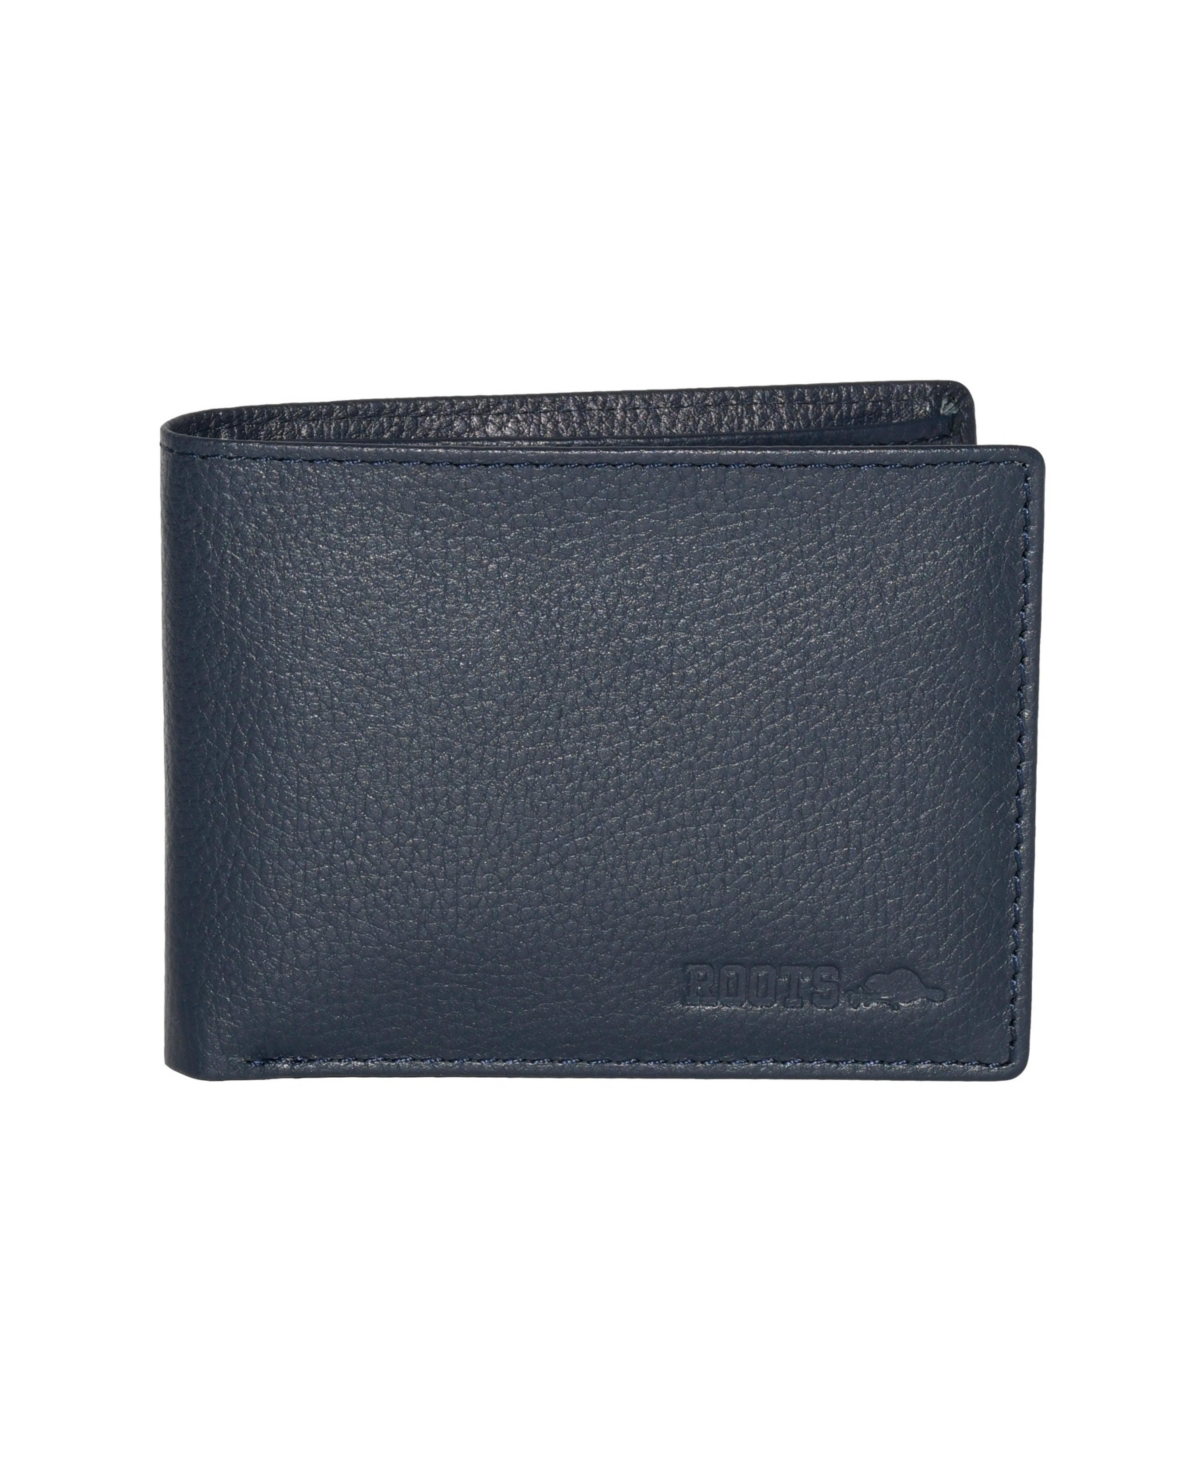 ROOTS MEN'S MEN LEATHER SLIMFOLD WALLET WITH REMOVABLE PASSCASE